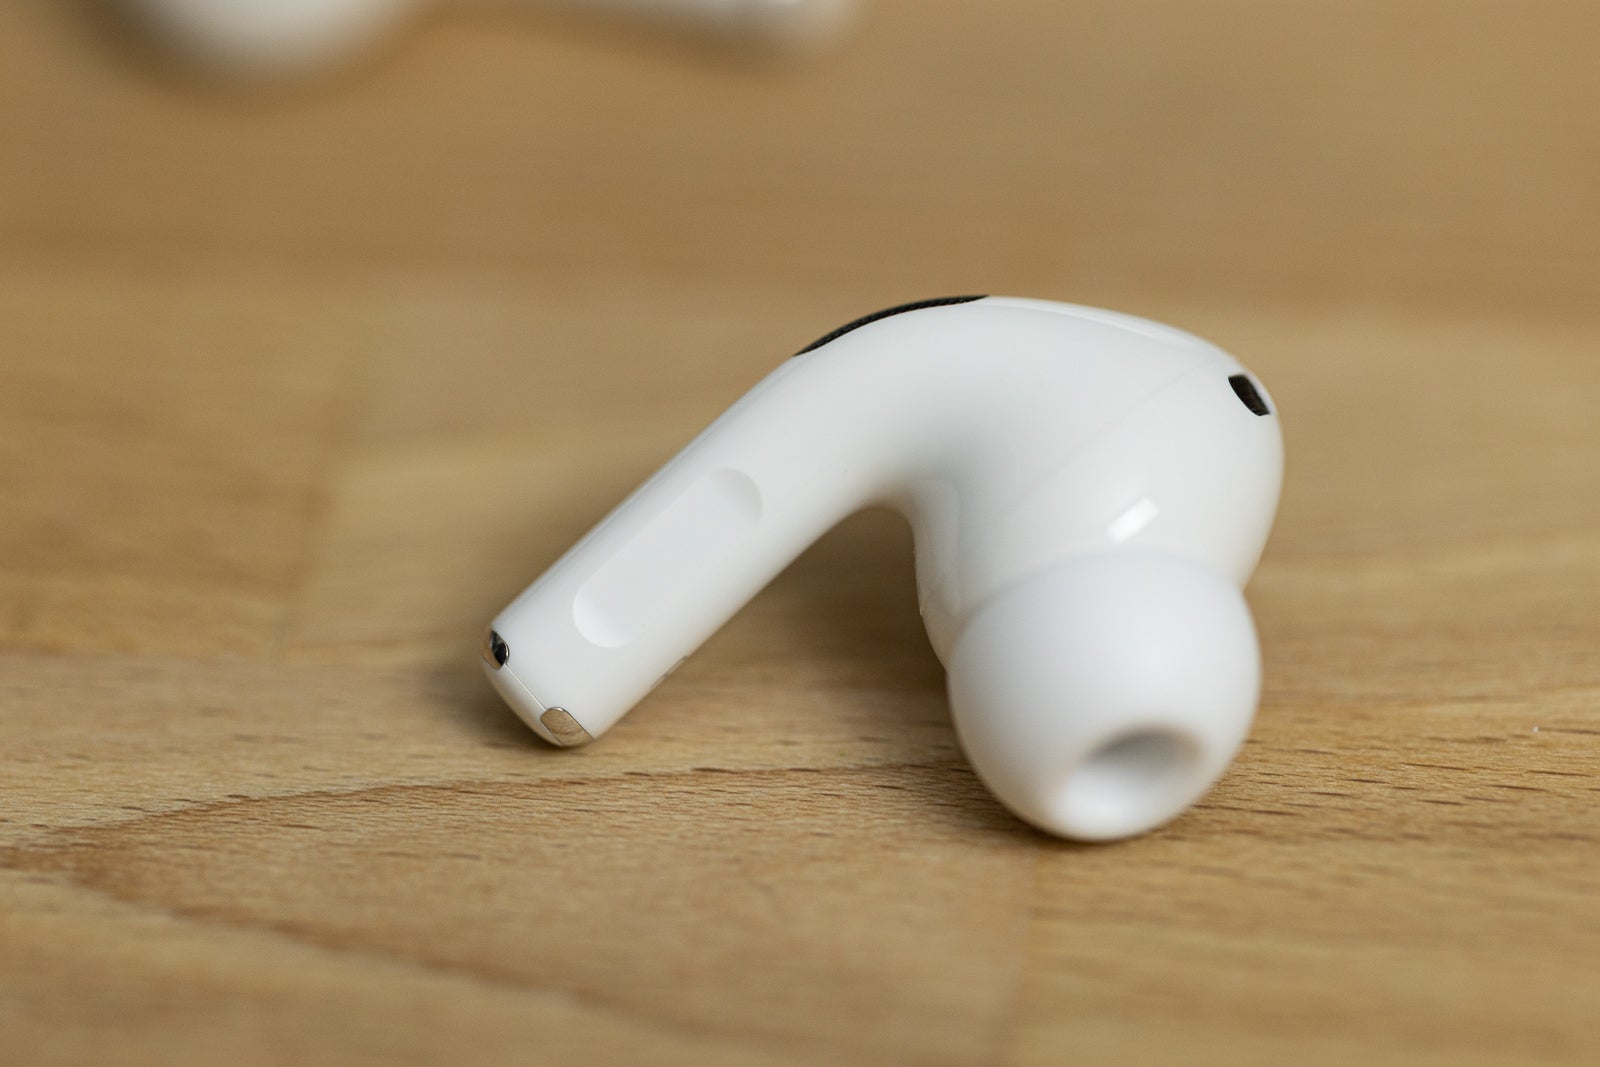 (Image Credit - PhoneArena) AirPods Pro 2's touch sensitive area - AirPods Pro 2 review: Closer to perfection